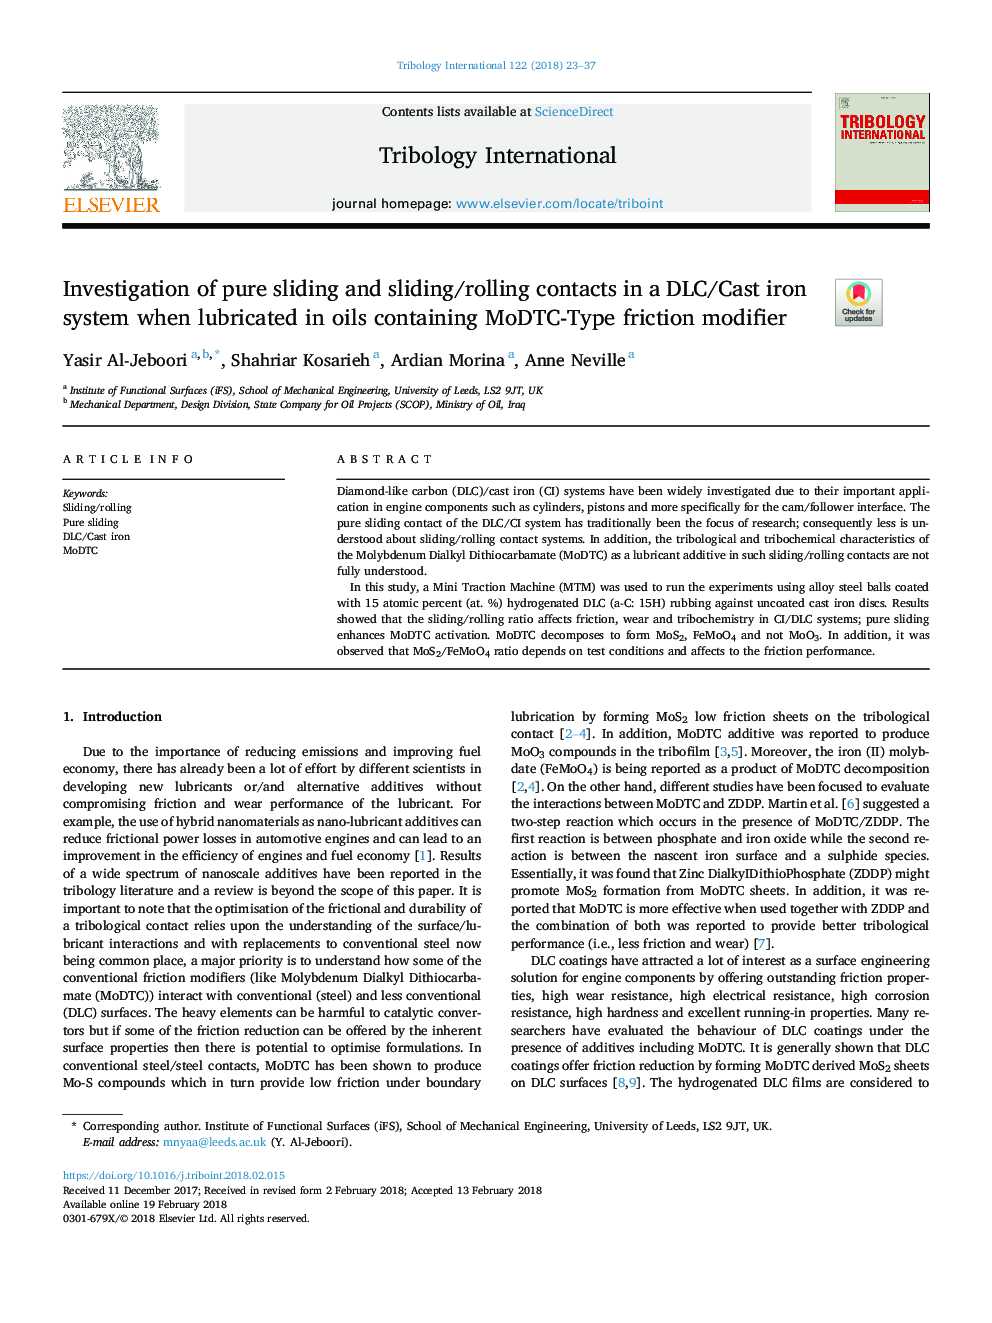 Investigation of pure sliding and sliding/rolling contacts in a DLC/Cast iron system when lubricated in oils containing MoDTC-Type friction modifier